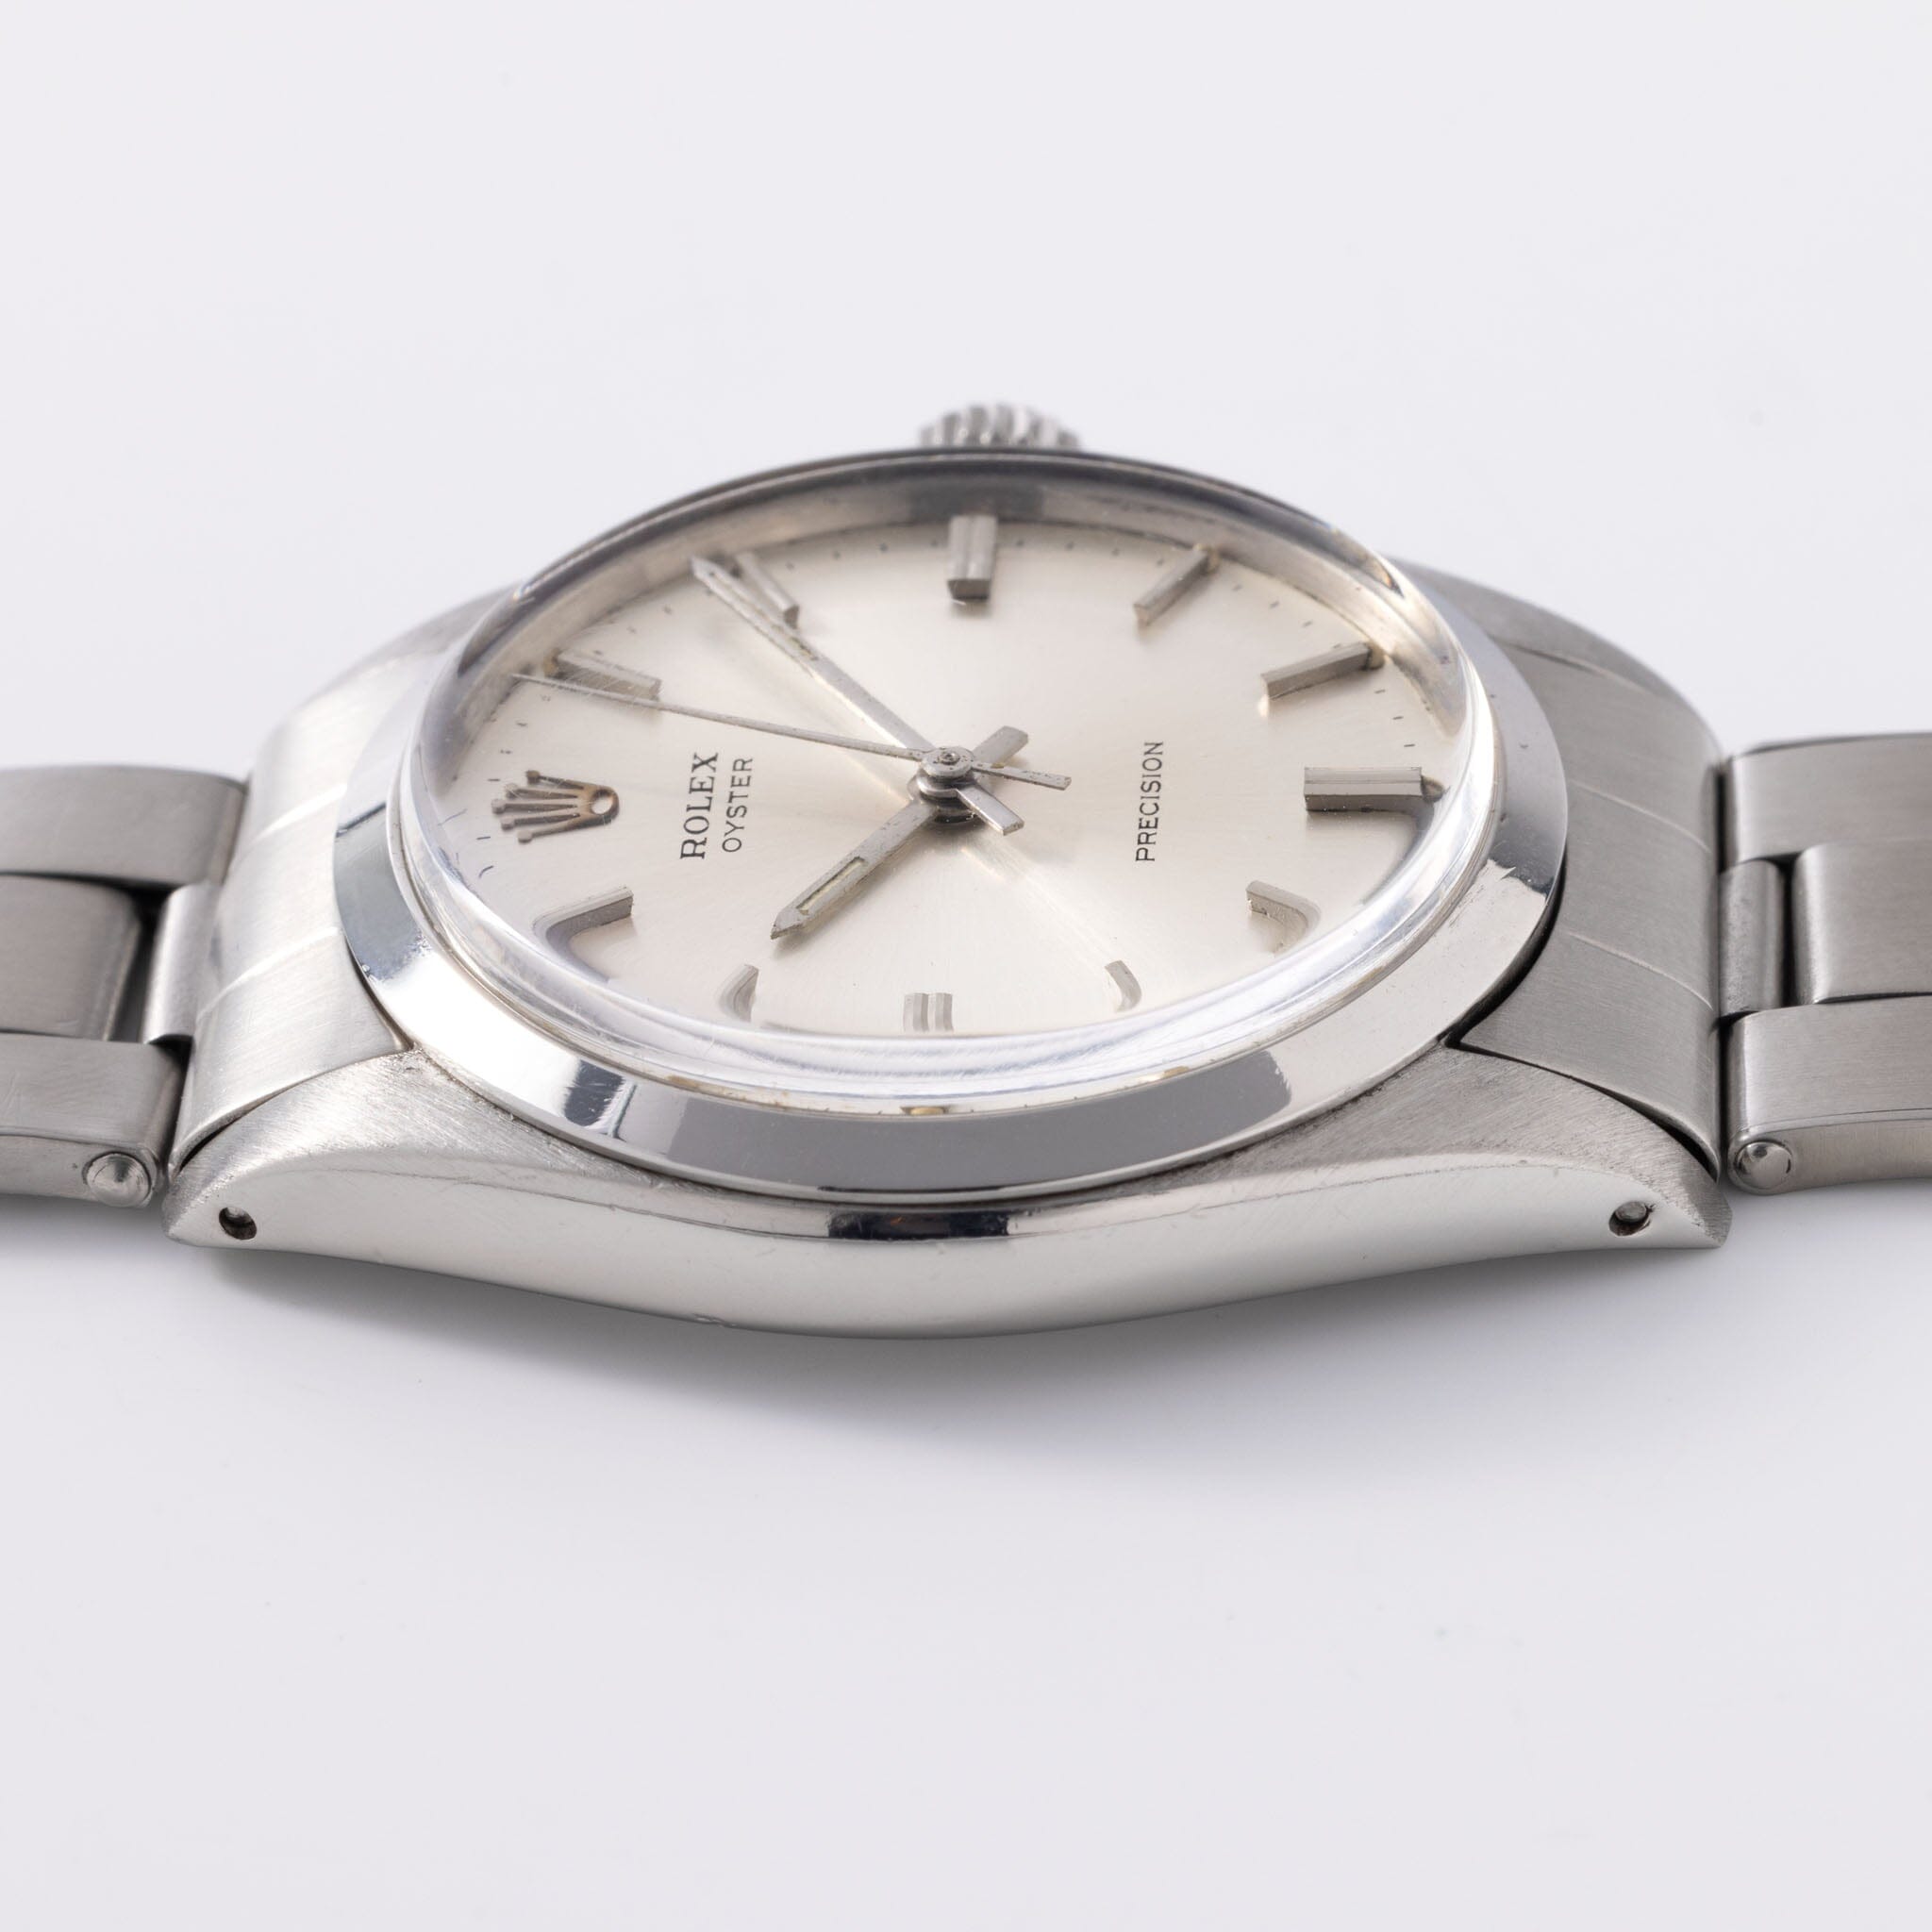 Rolex Oyster Precision 6426 Silver Dial FAP Issued Box and Papers